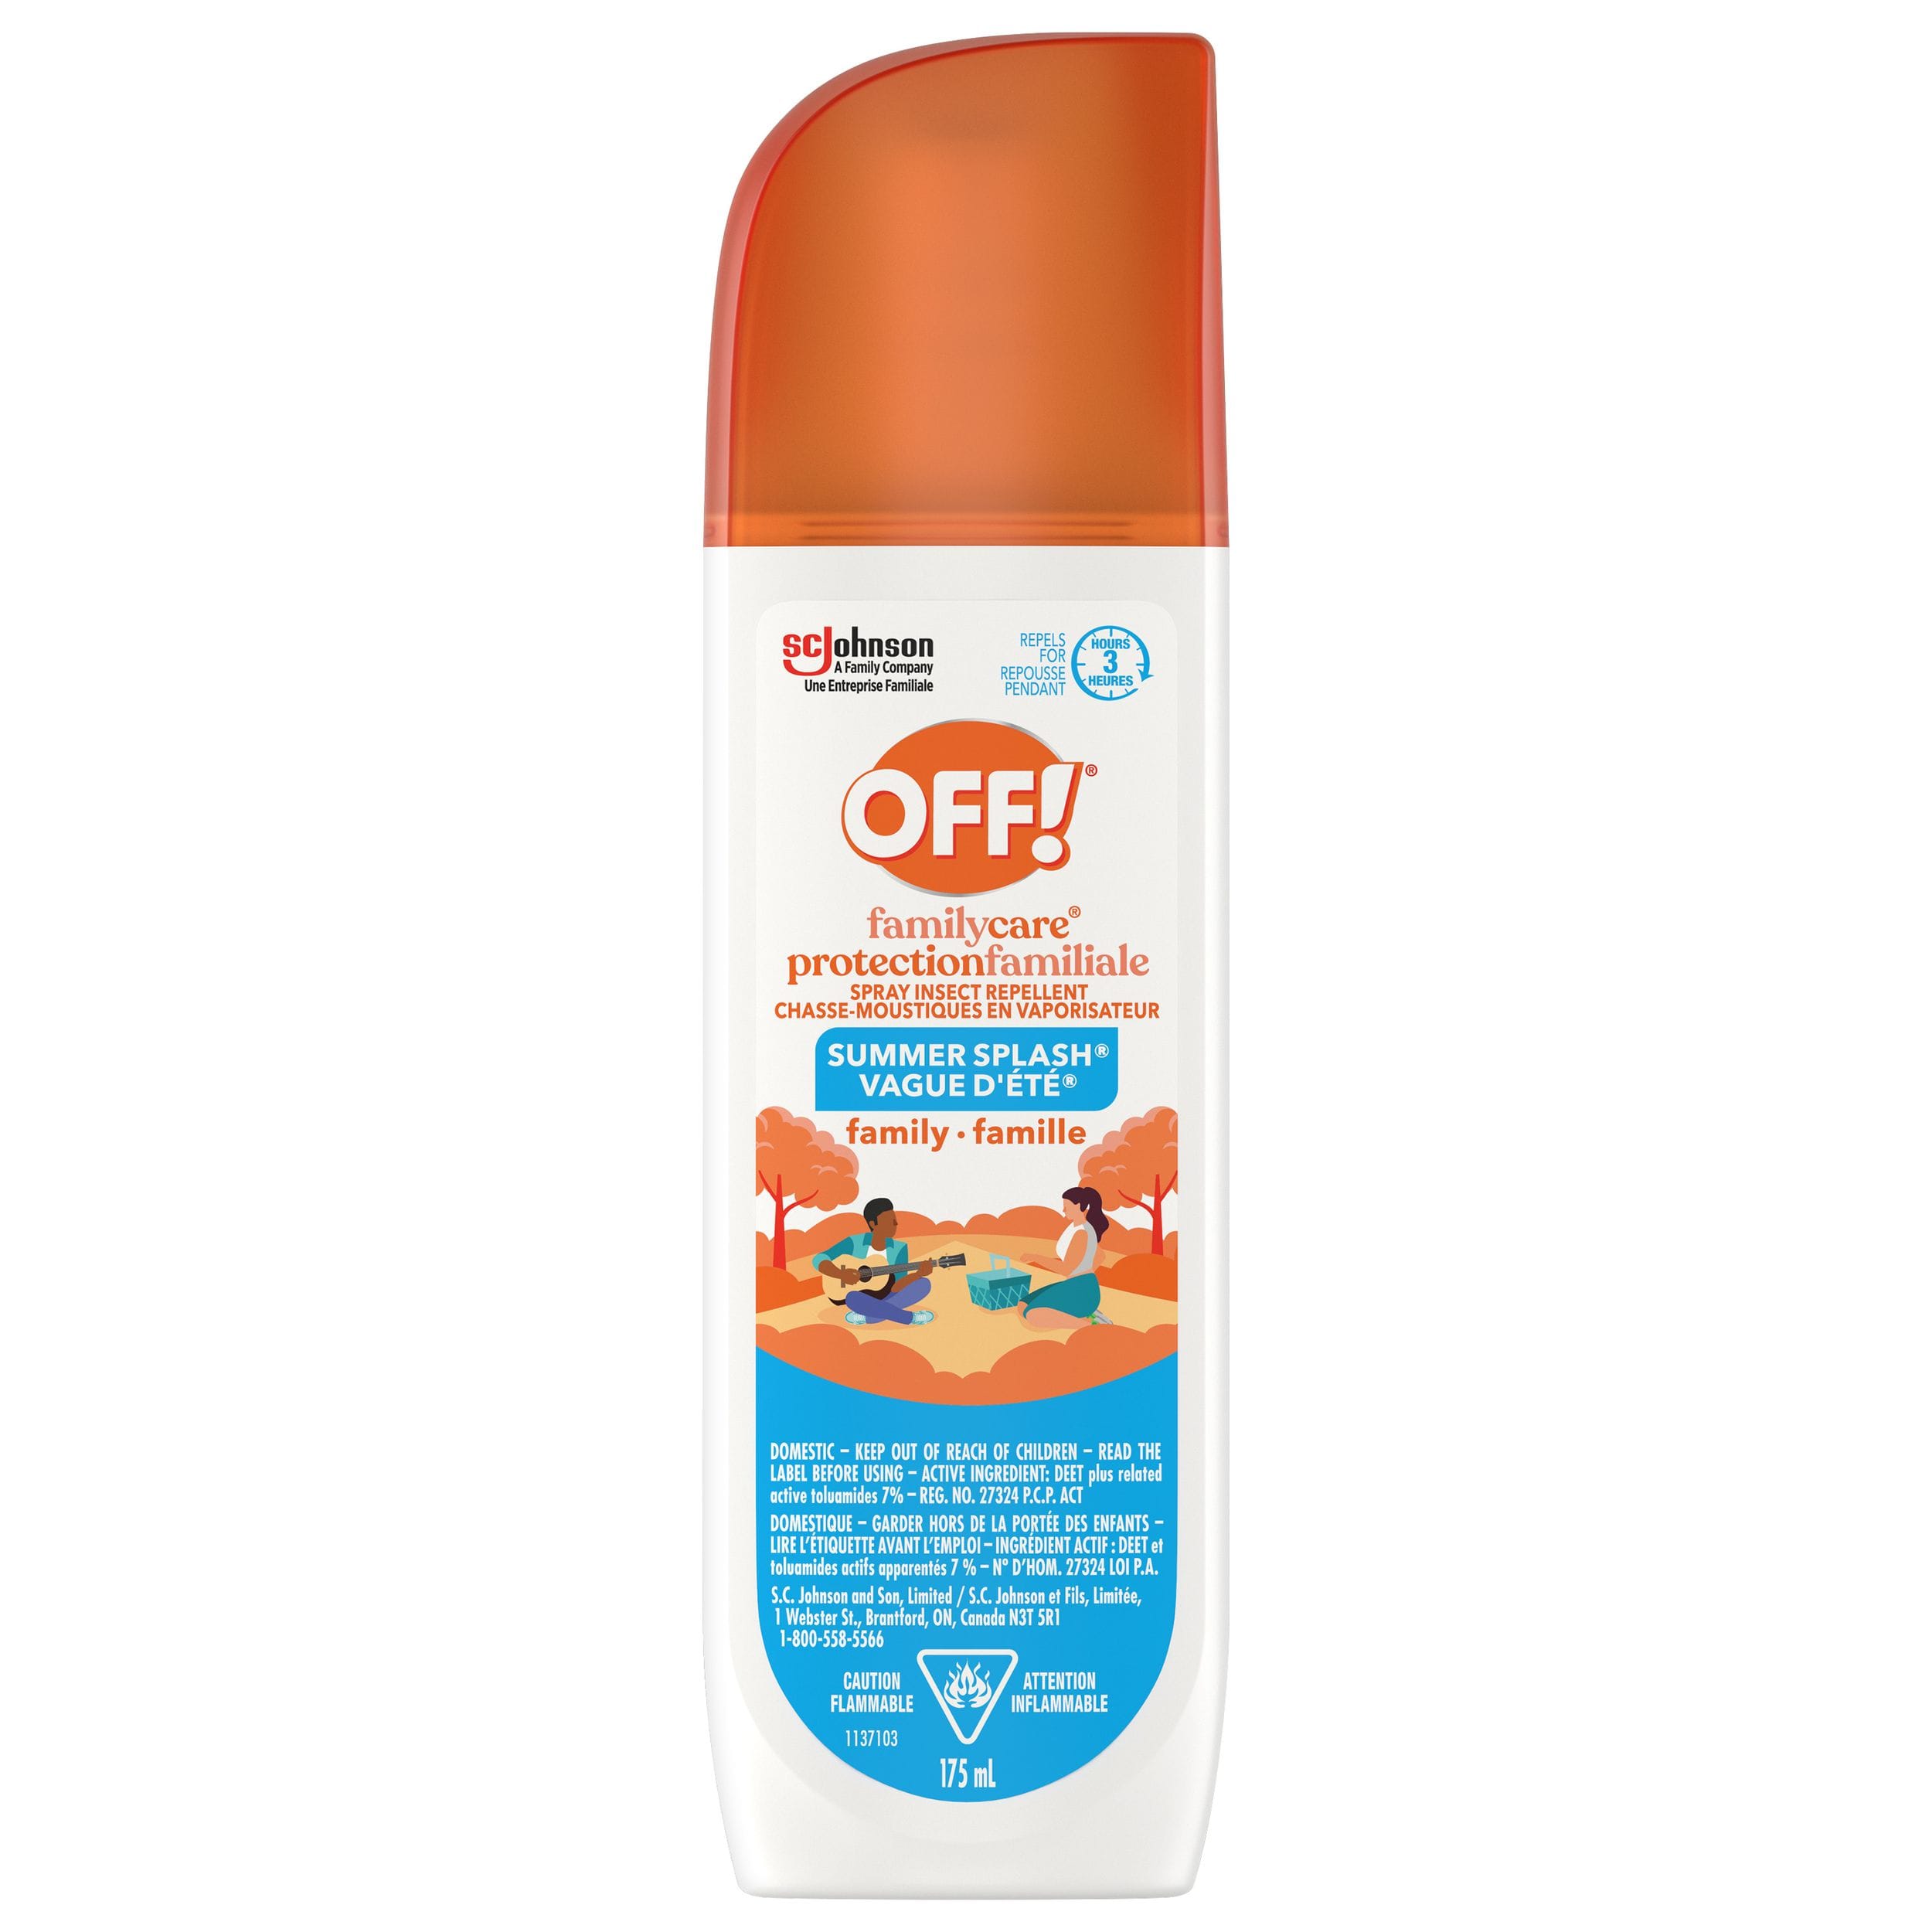 OFF! Kids Insect Repellent Spray, 100% Plant Based Oils, Safe for Use On  Babies, Toddlers and Kids, 4 oz